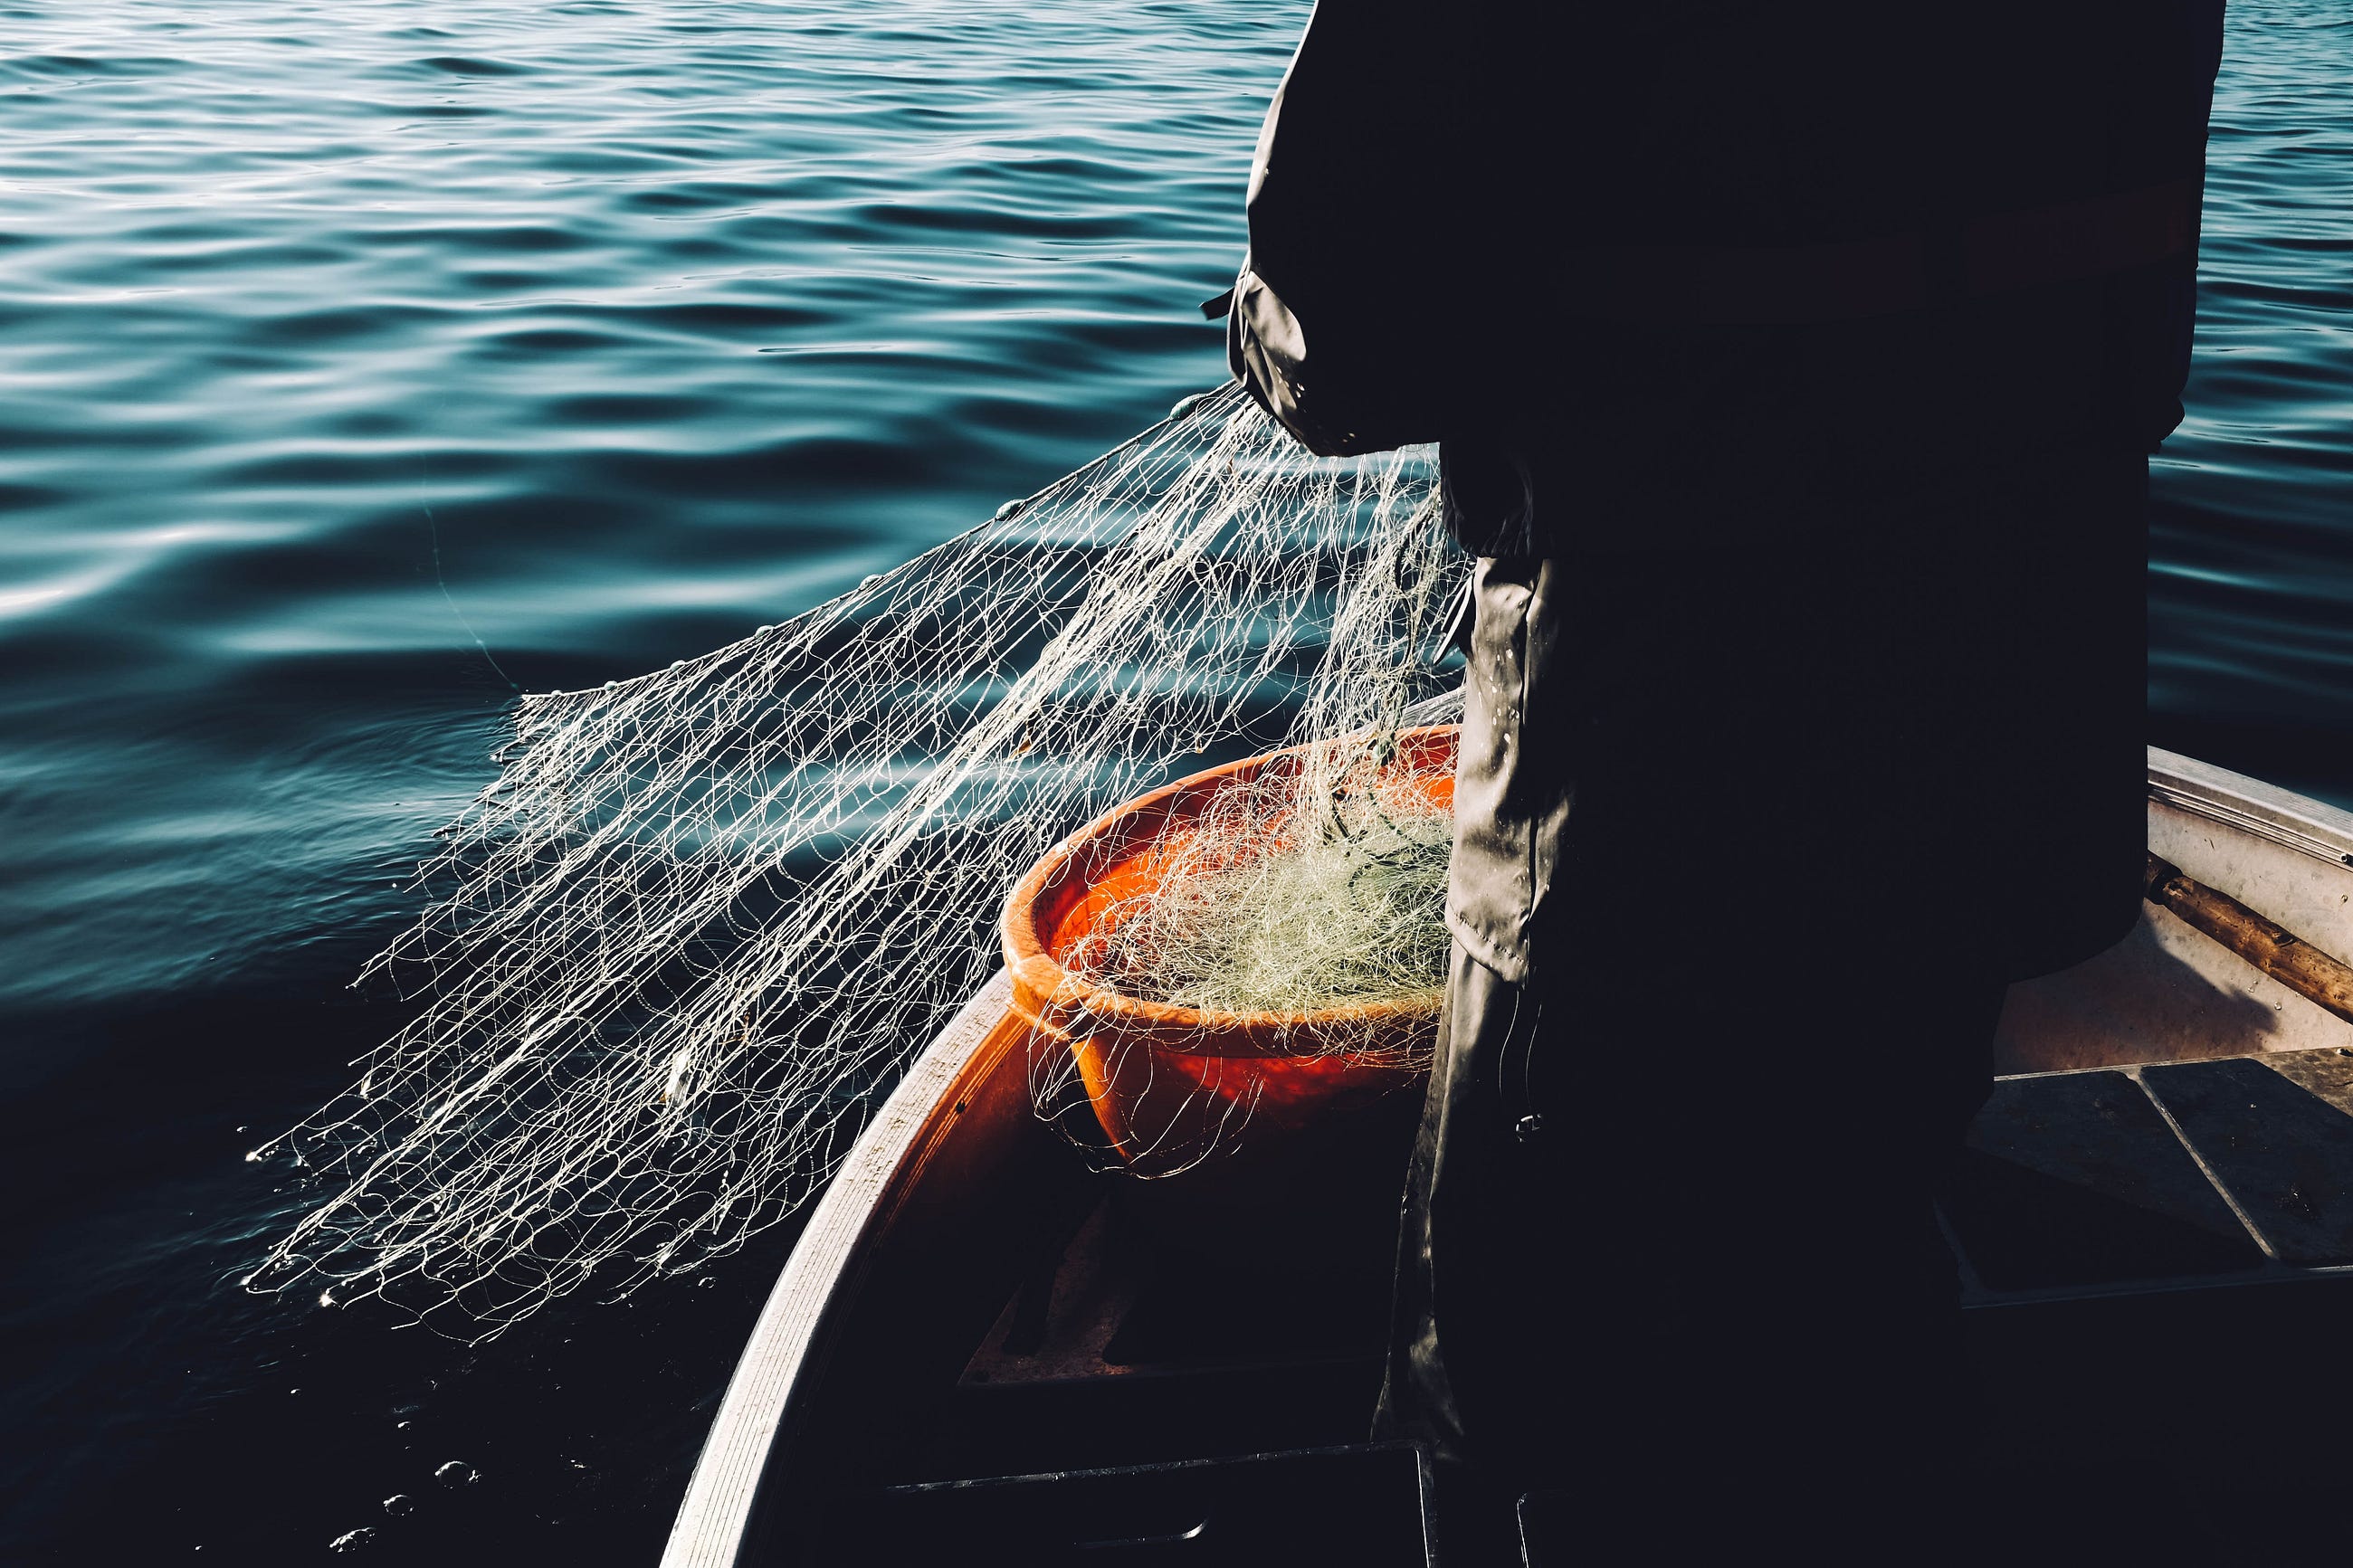 “I Will Make You Fishers of Men”: A Modern Exegesis on Online Influence and Intentionality